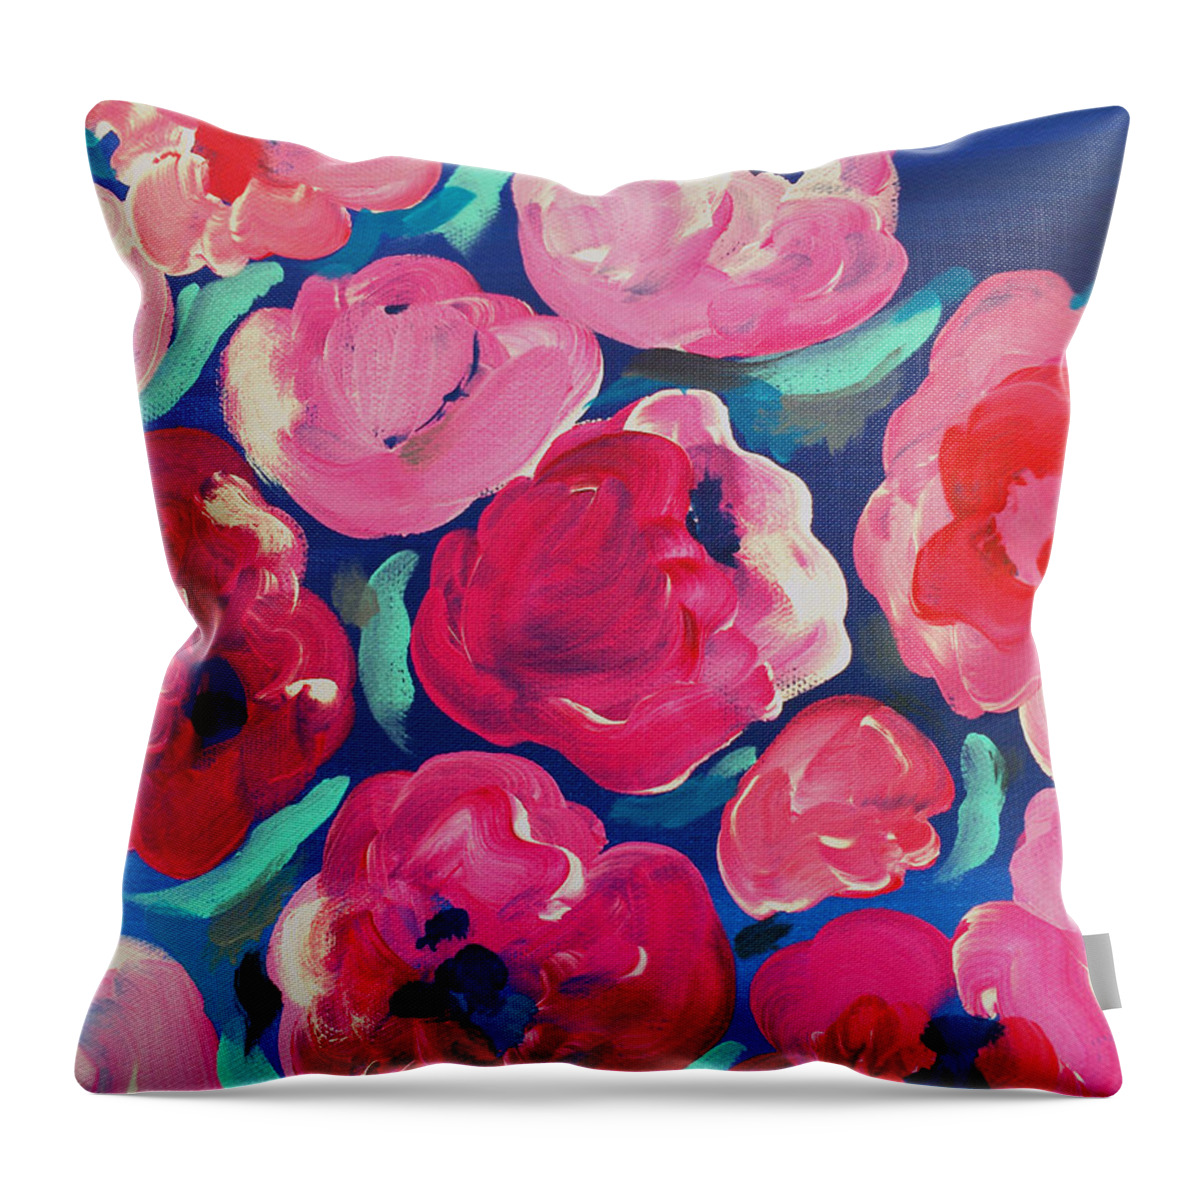 Floral Art Throw Pillow featuring the painting Amore by Beth Ann Scott